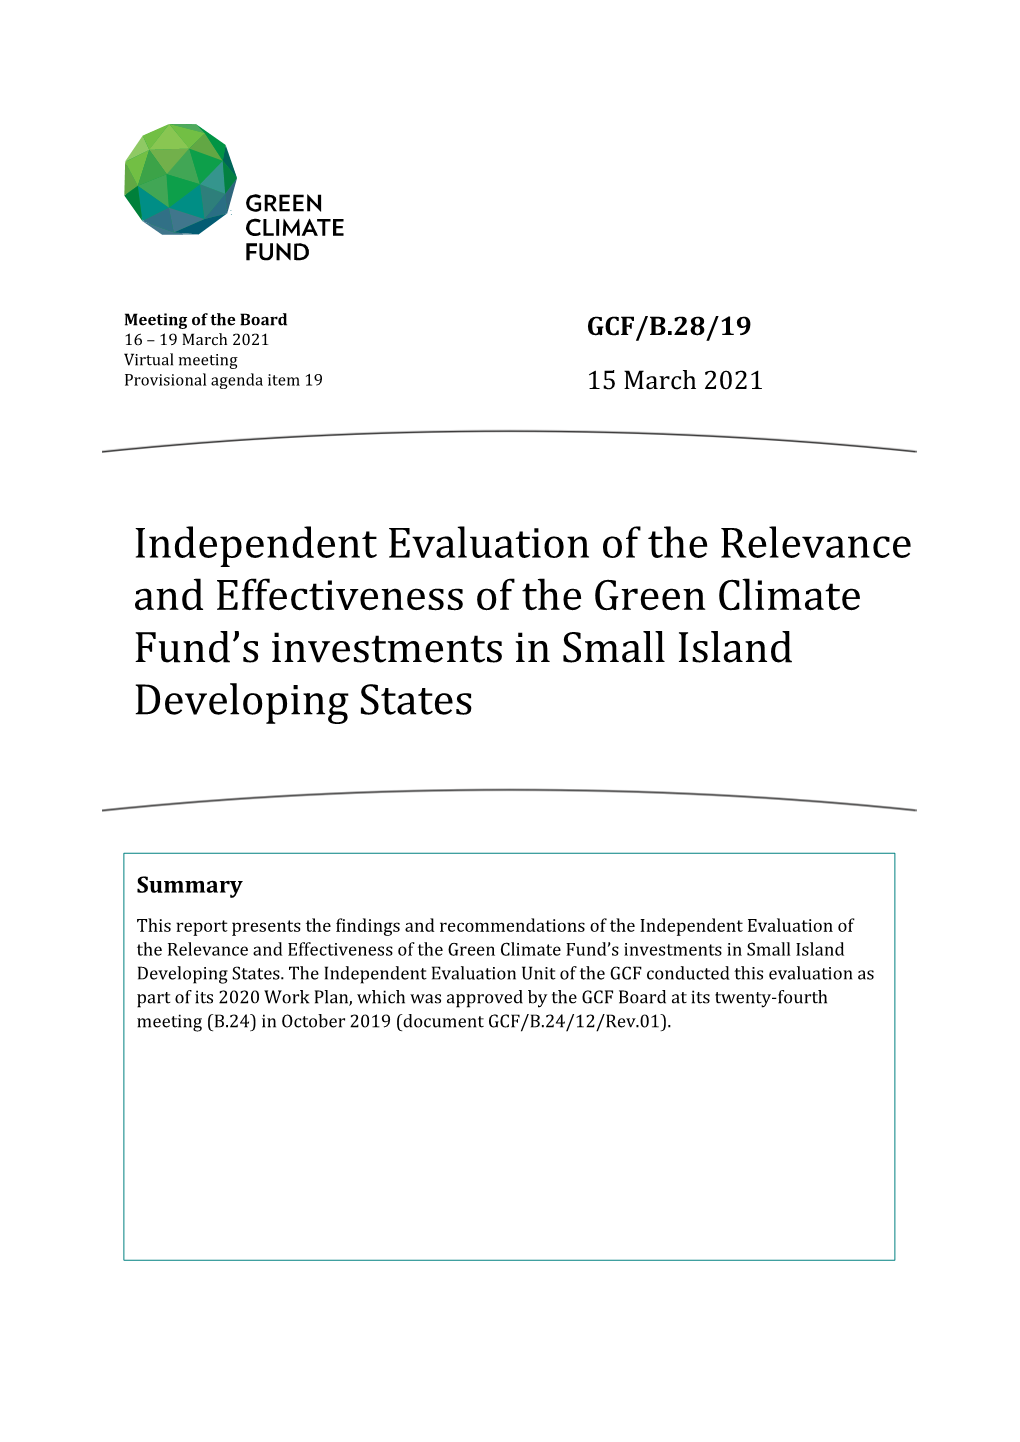 Independent Evaluation of the Relevance and Effectiveness of the Green Climate Fund’S Investments in Small Island Developing S